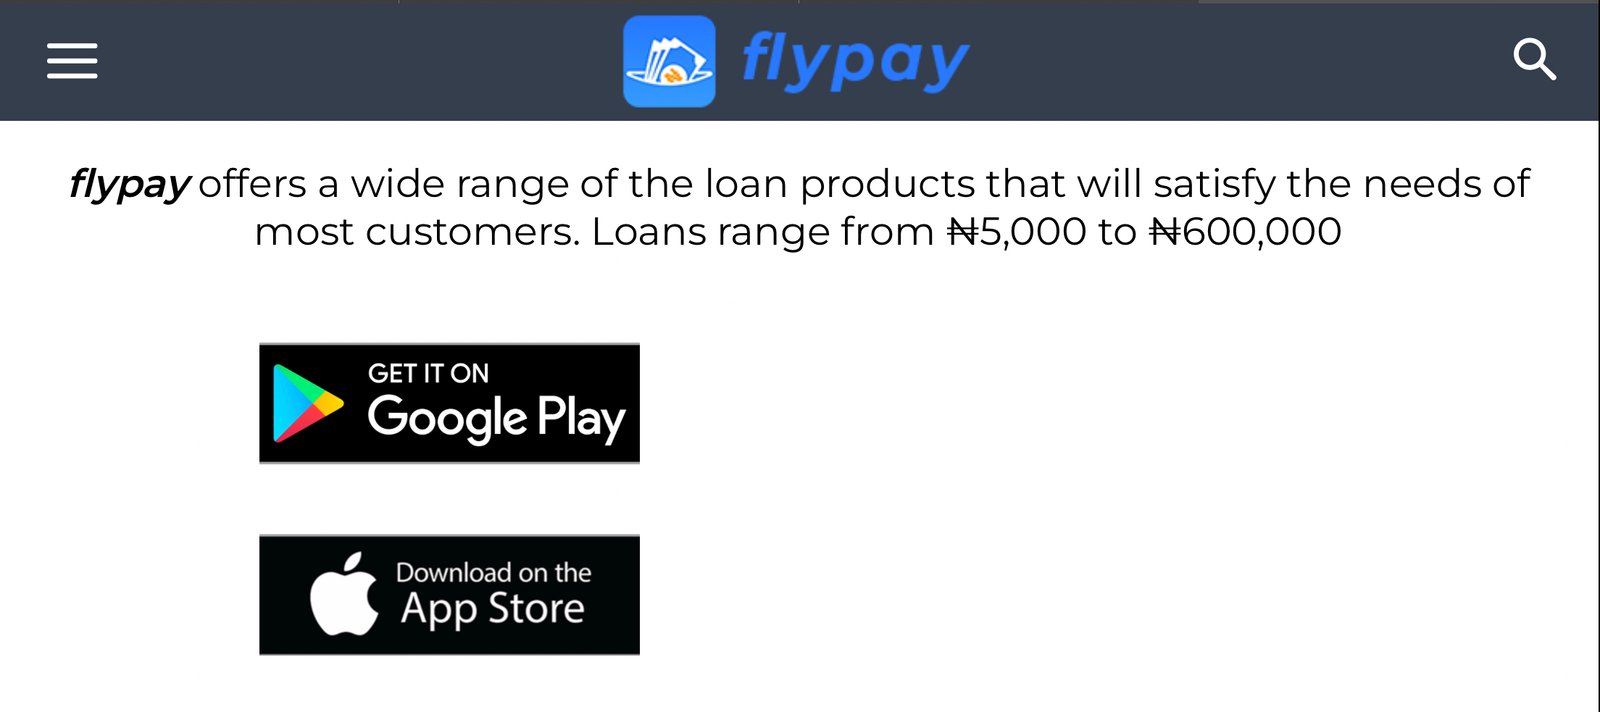 Flypay-Naira Cash Loan Login With Phone Number, Email, Online Portal, Website